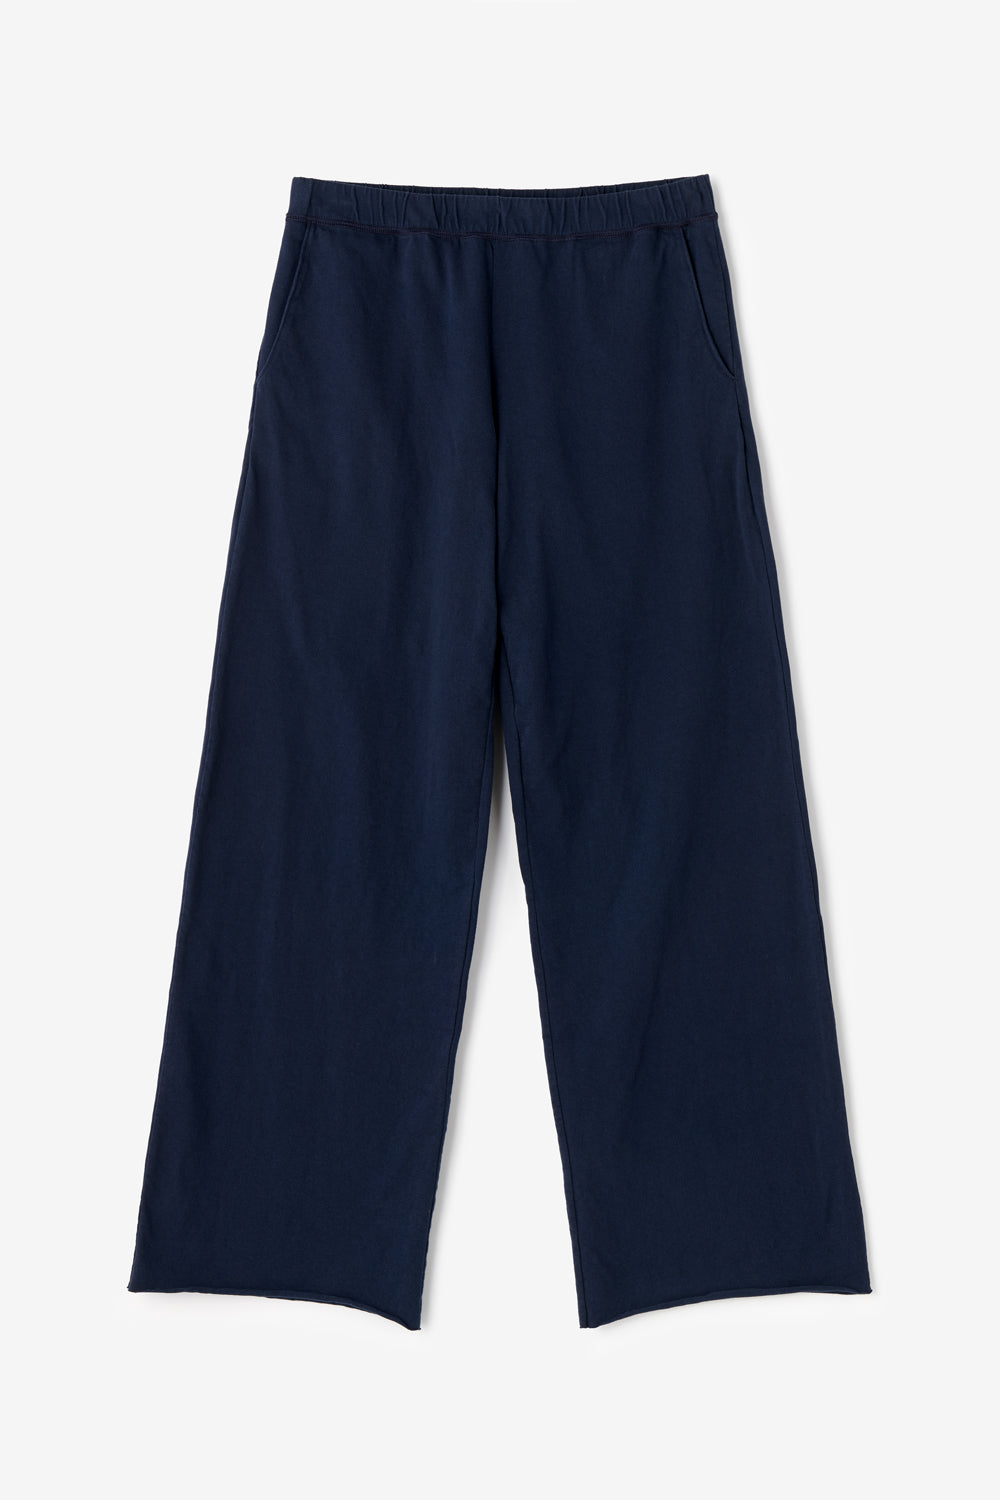 Alabama Chanin Adrienne Pant wide leg pant made of 100% organic cotton in navy.